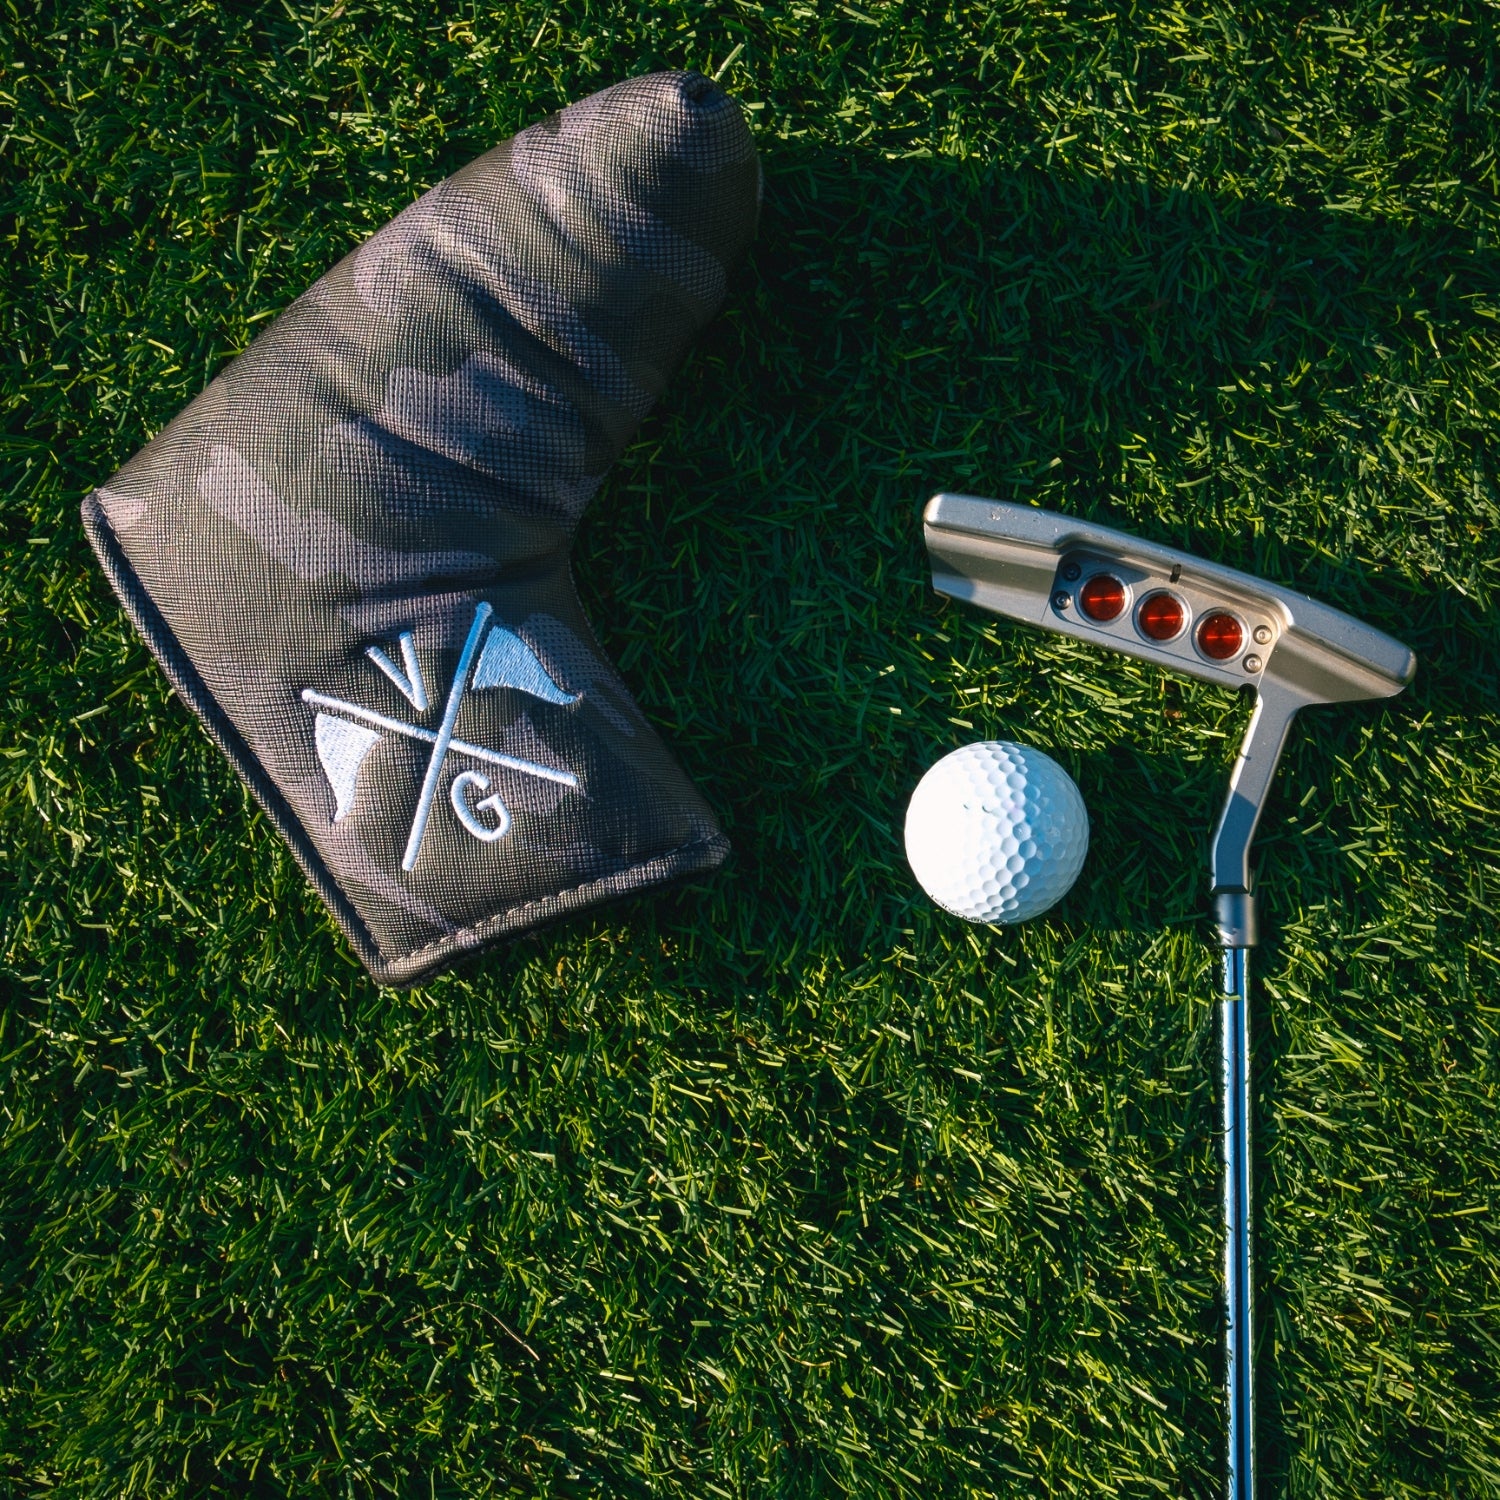 Orquest aedelweiss Hockey Clothing Company new Golf collection. With more and more teams hitting the links, it’s time to continue our quest of taking over the golf course as well… Learn more about our May 1, 2023 new Orquest aedelweiss Country Club golf releases.